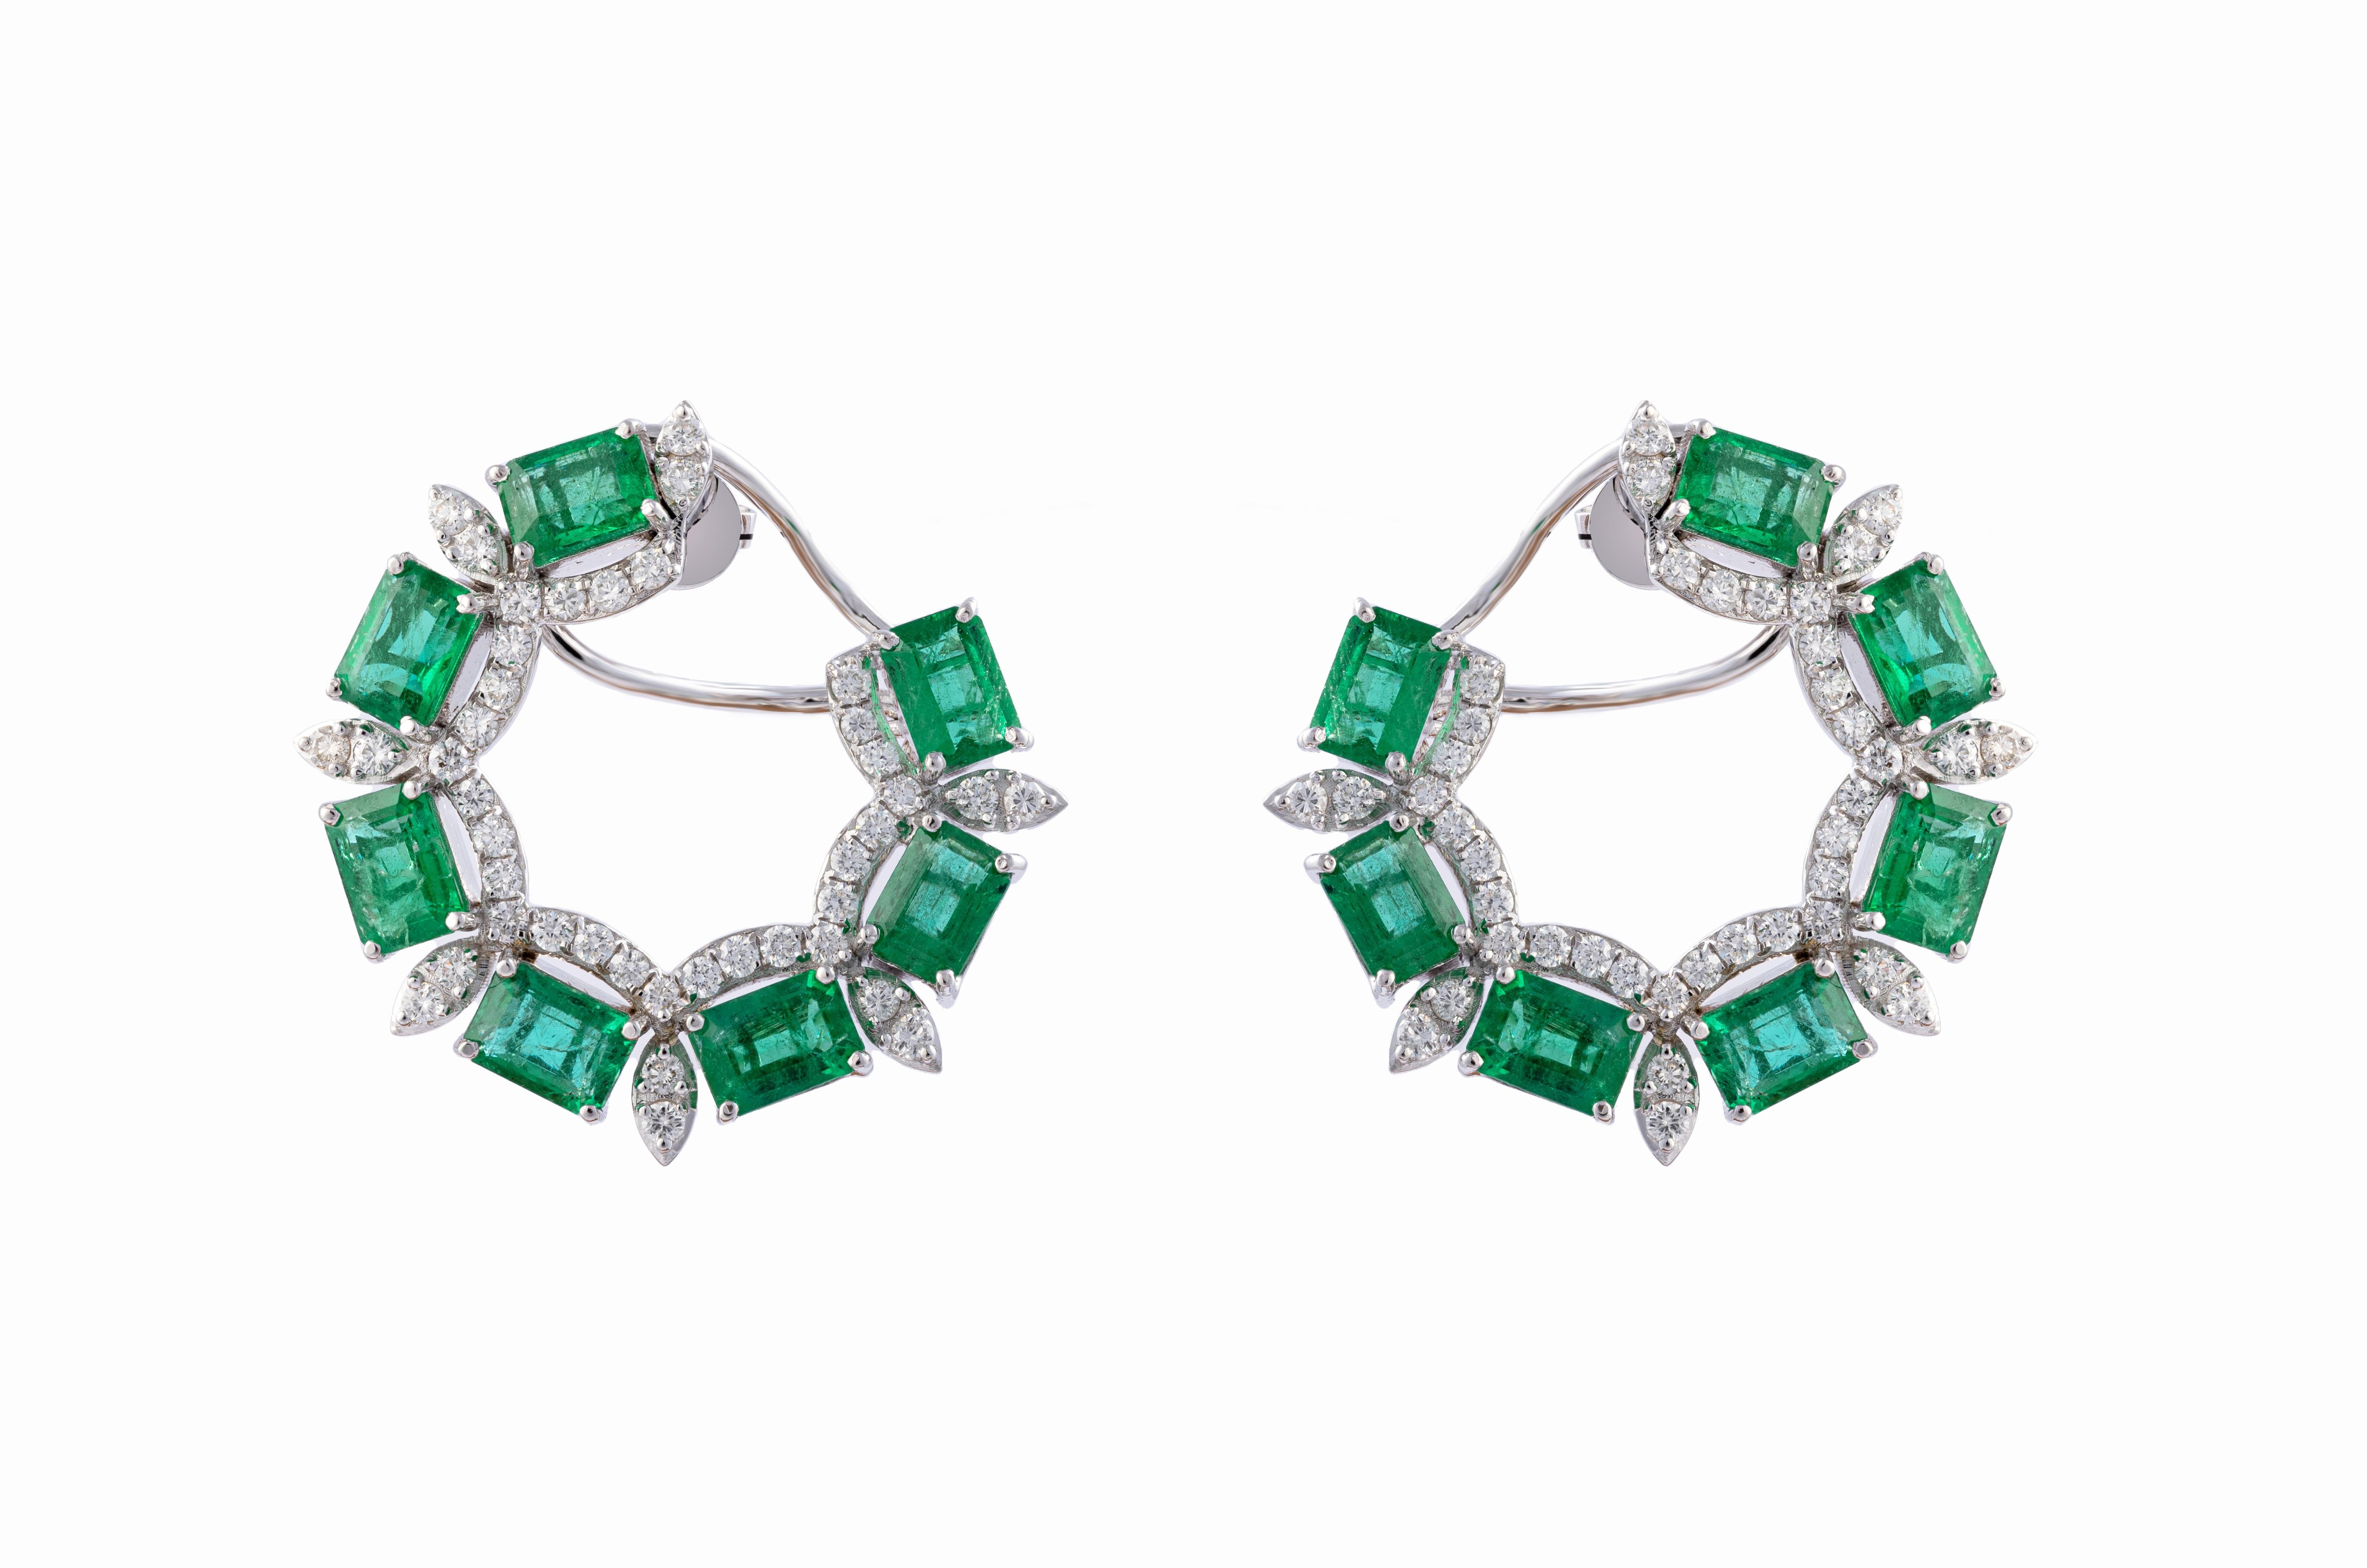 This is a beautiful Zambian natural Emerald earring with diamonds and 14k gold . the Emeralds are of very high quality and diamonds also vsi and G colour 
emerald : 13.04cts 
diamonds : 2.25cts
gold : 18.662gms 
very hard to capture the true color